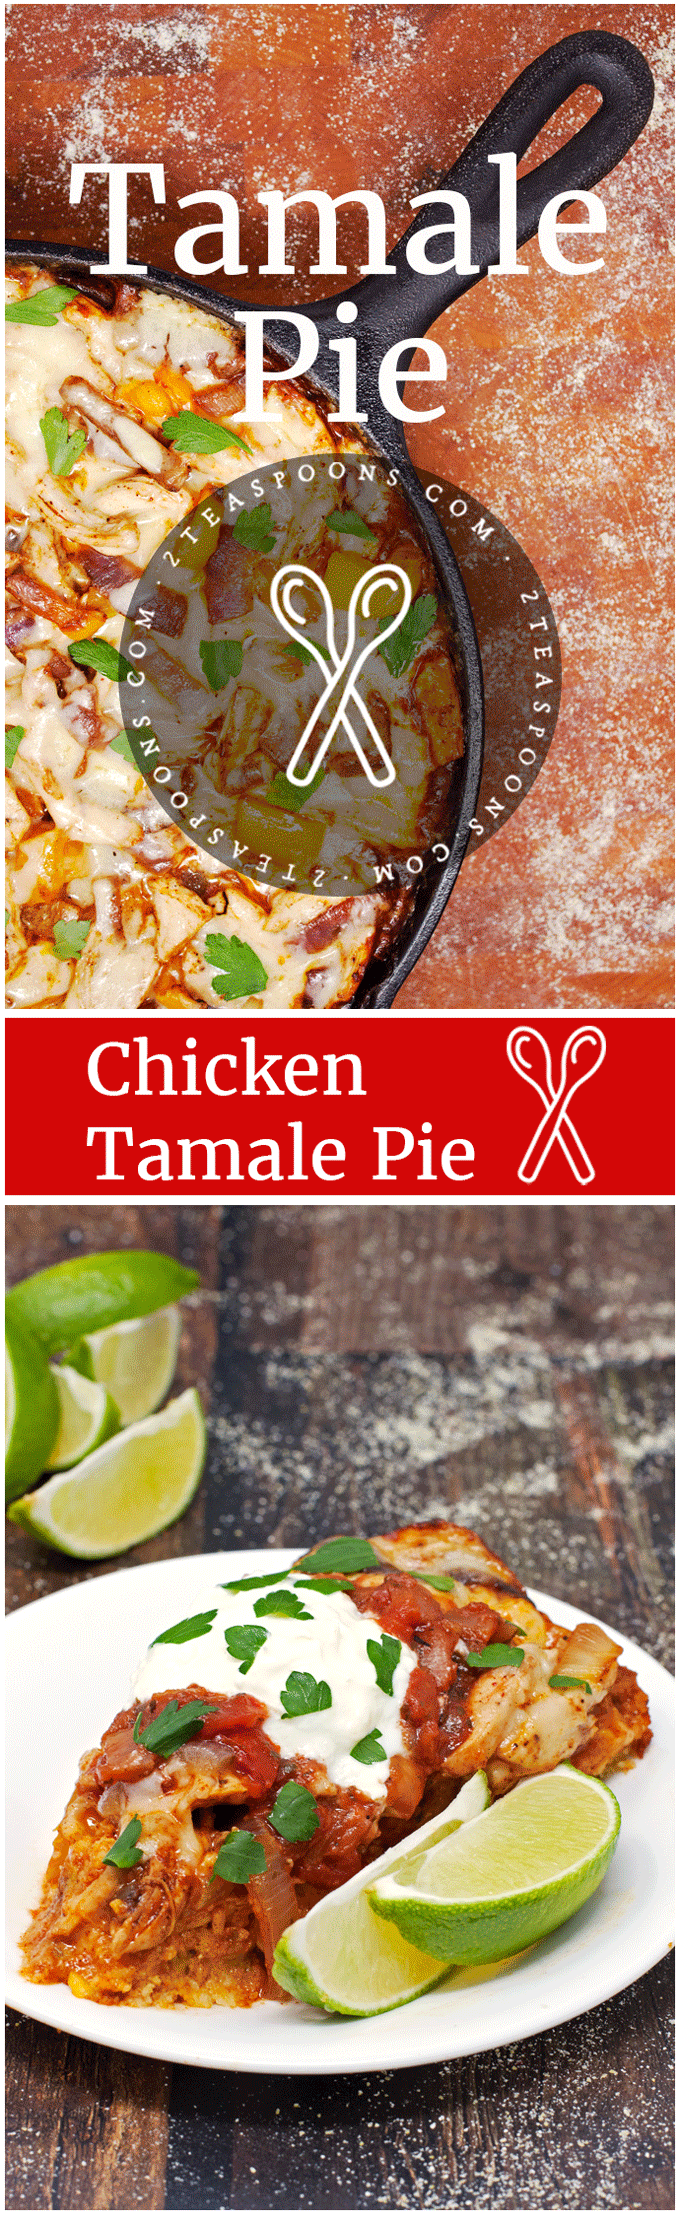 Chicken Tamale Pie: One-skillet, easy chicken tamale pie recipe with layers of cornbread, enchilada sauce, chicken and cheese, baked until melty and topped with your favorite taco fixings! - 2teaspoons.com